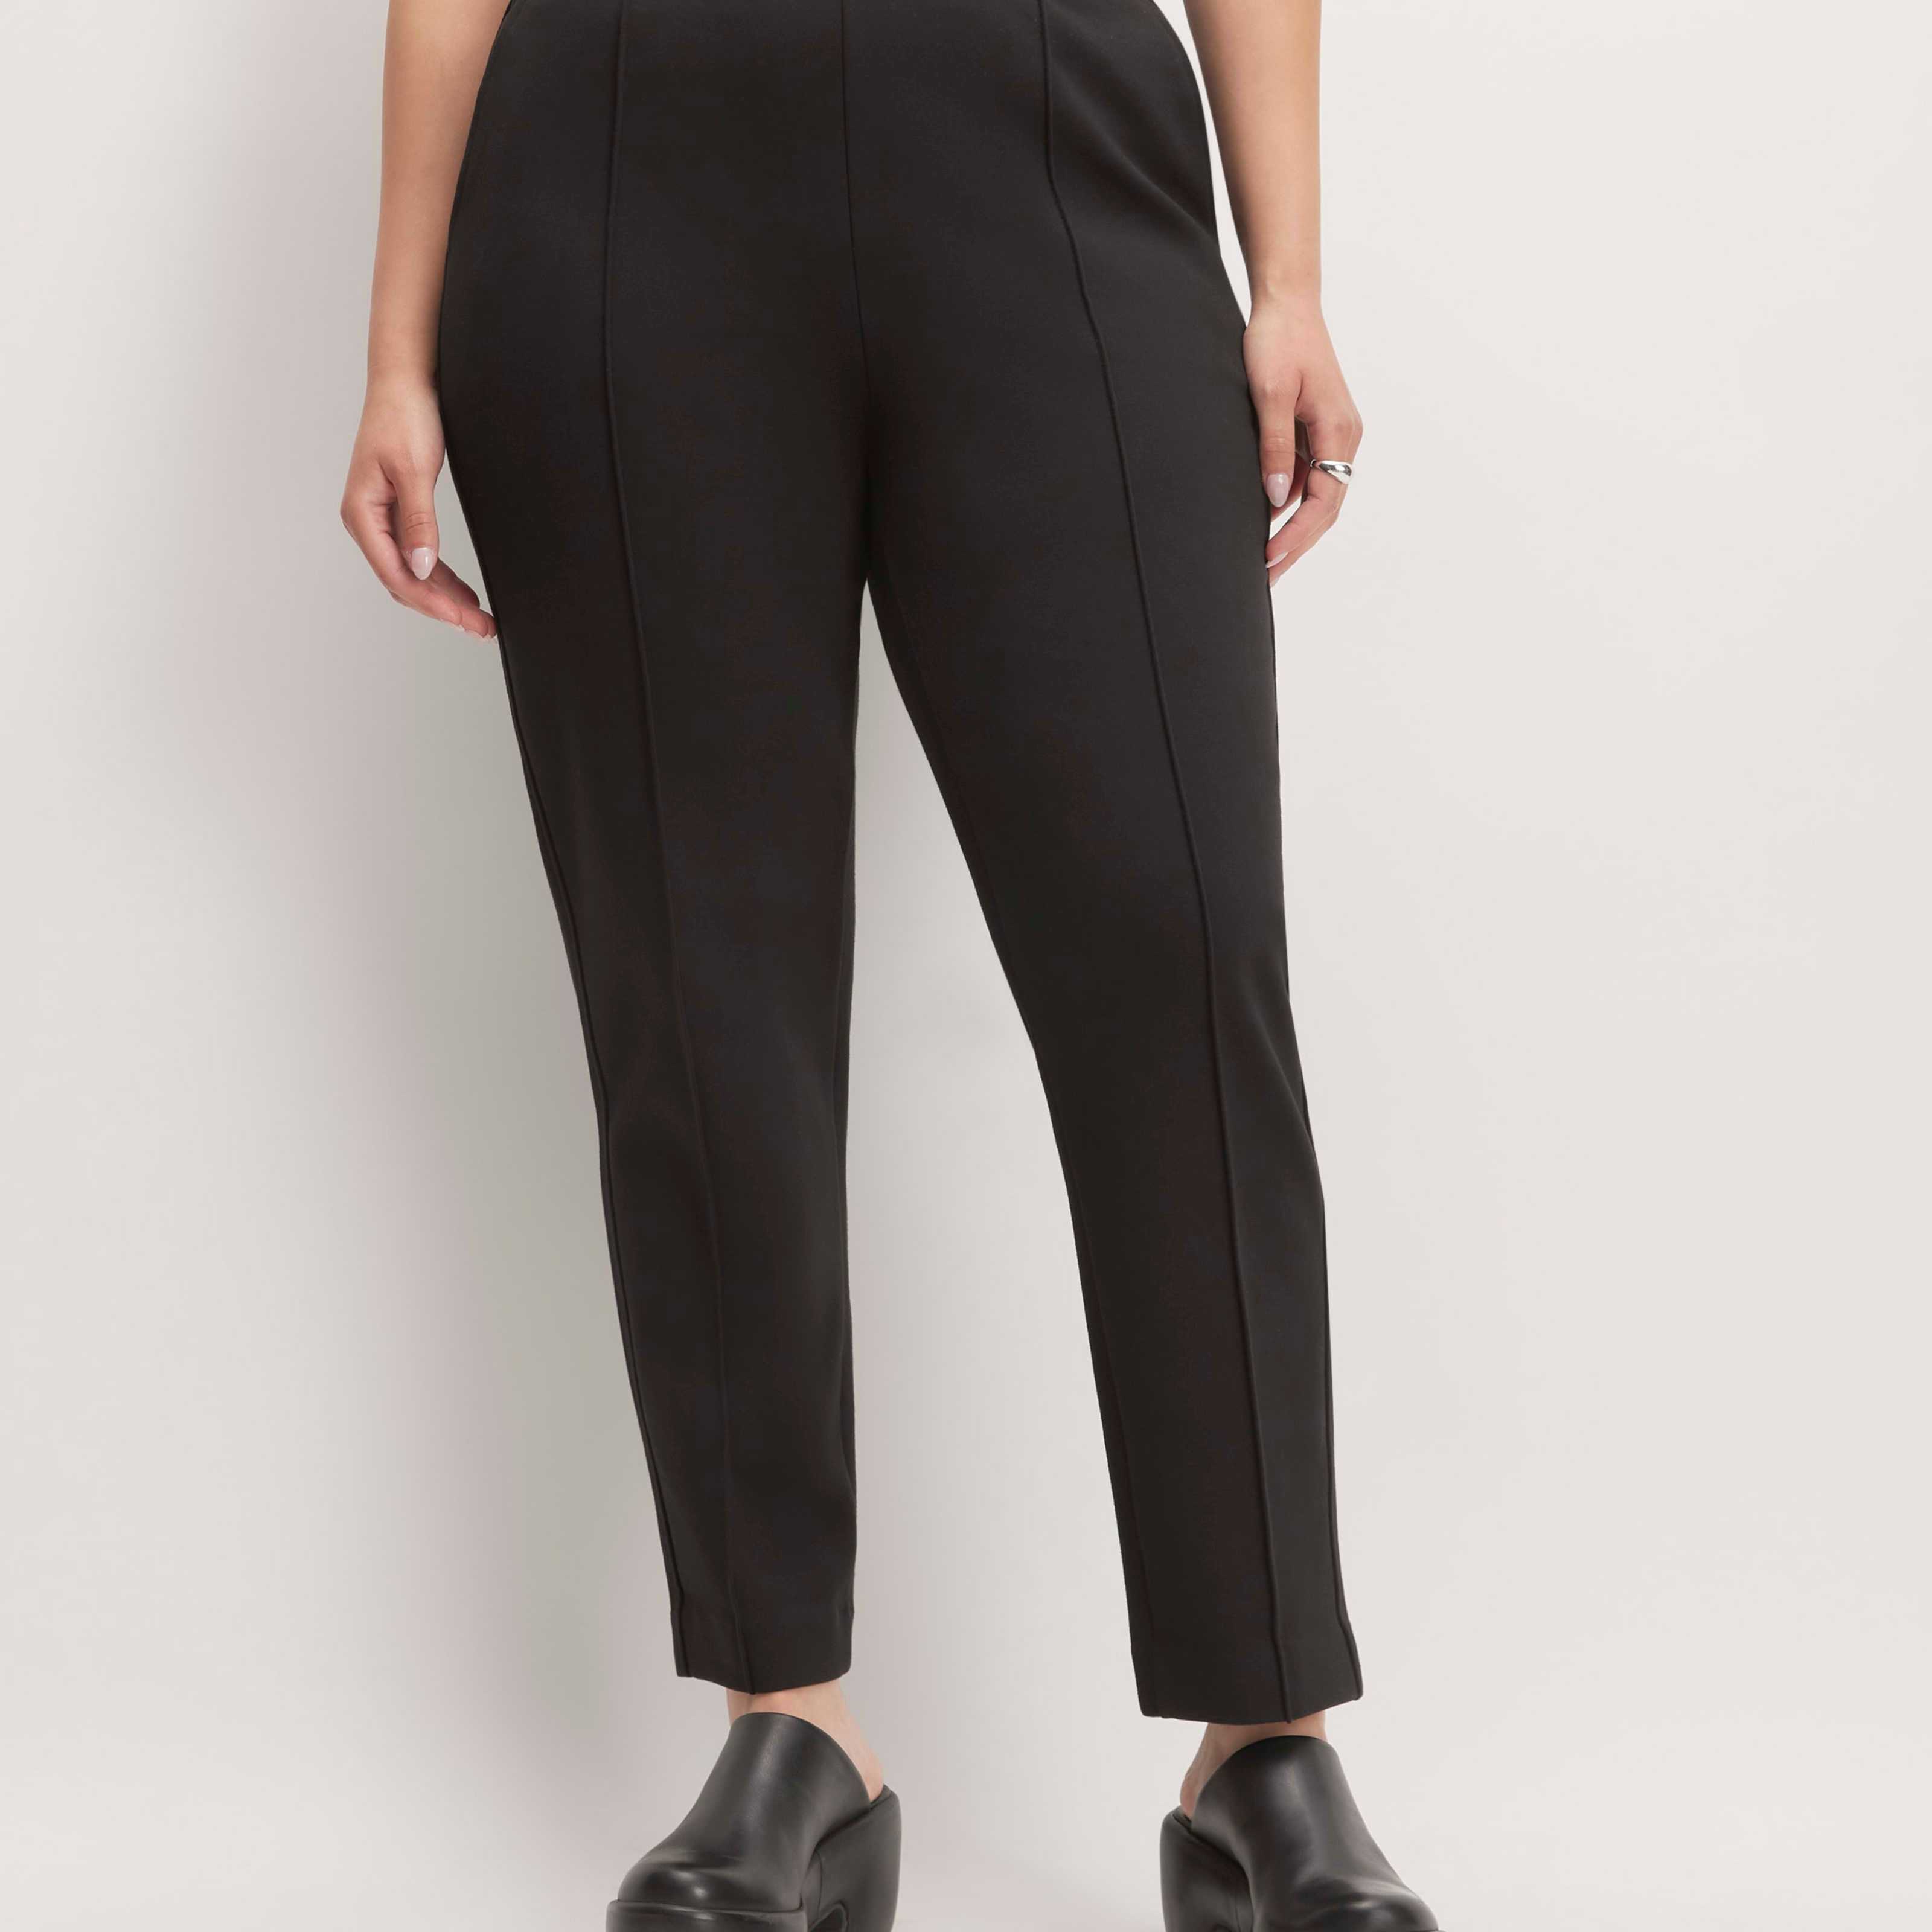 Women's Dream Pant® by Everlane in Black, Size S